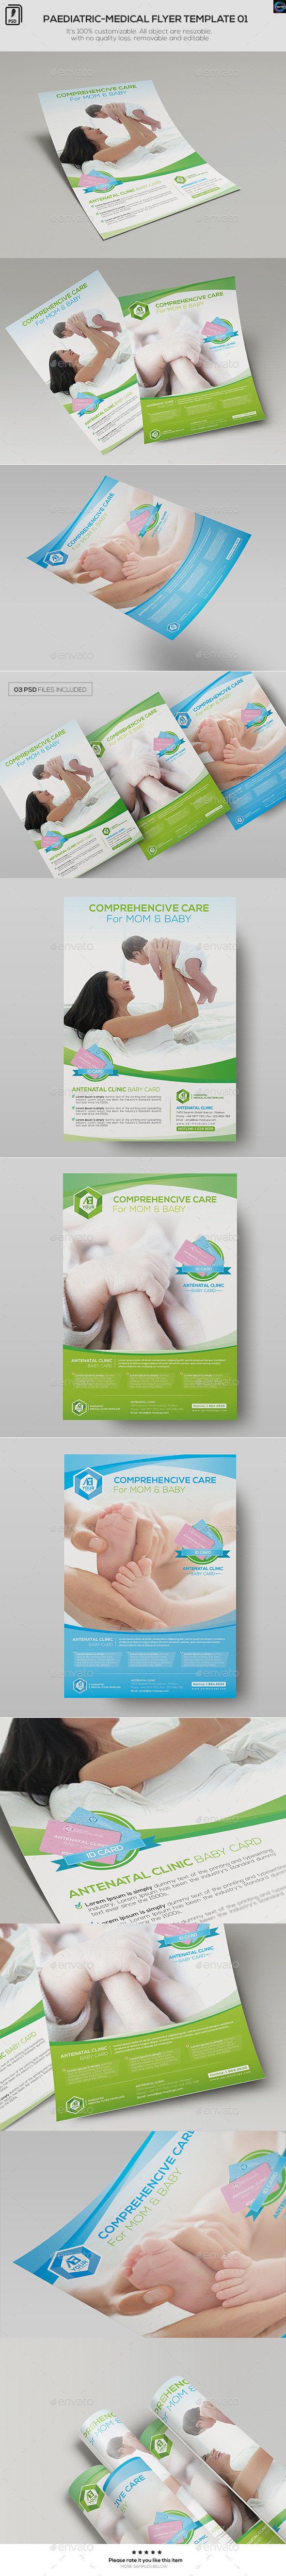 Paediatric medical flyer 20template 01 preview